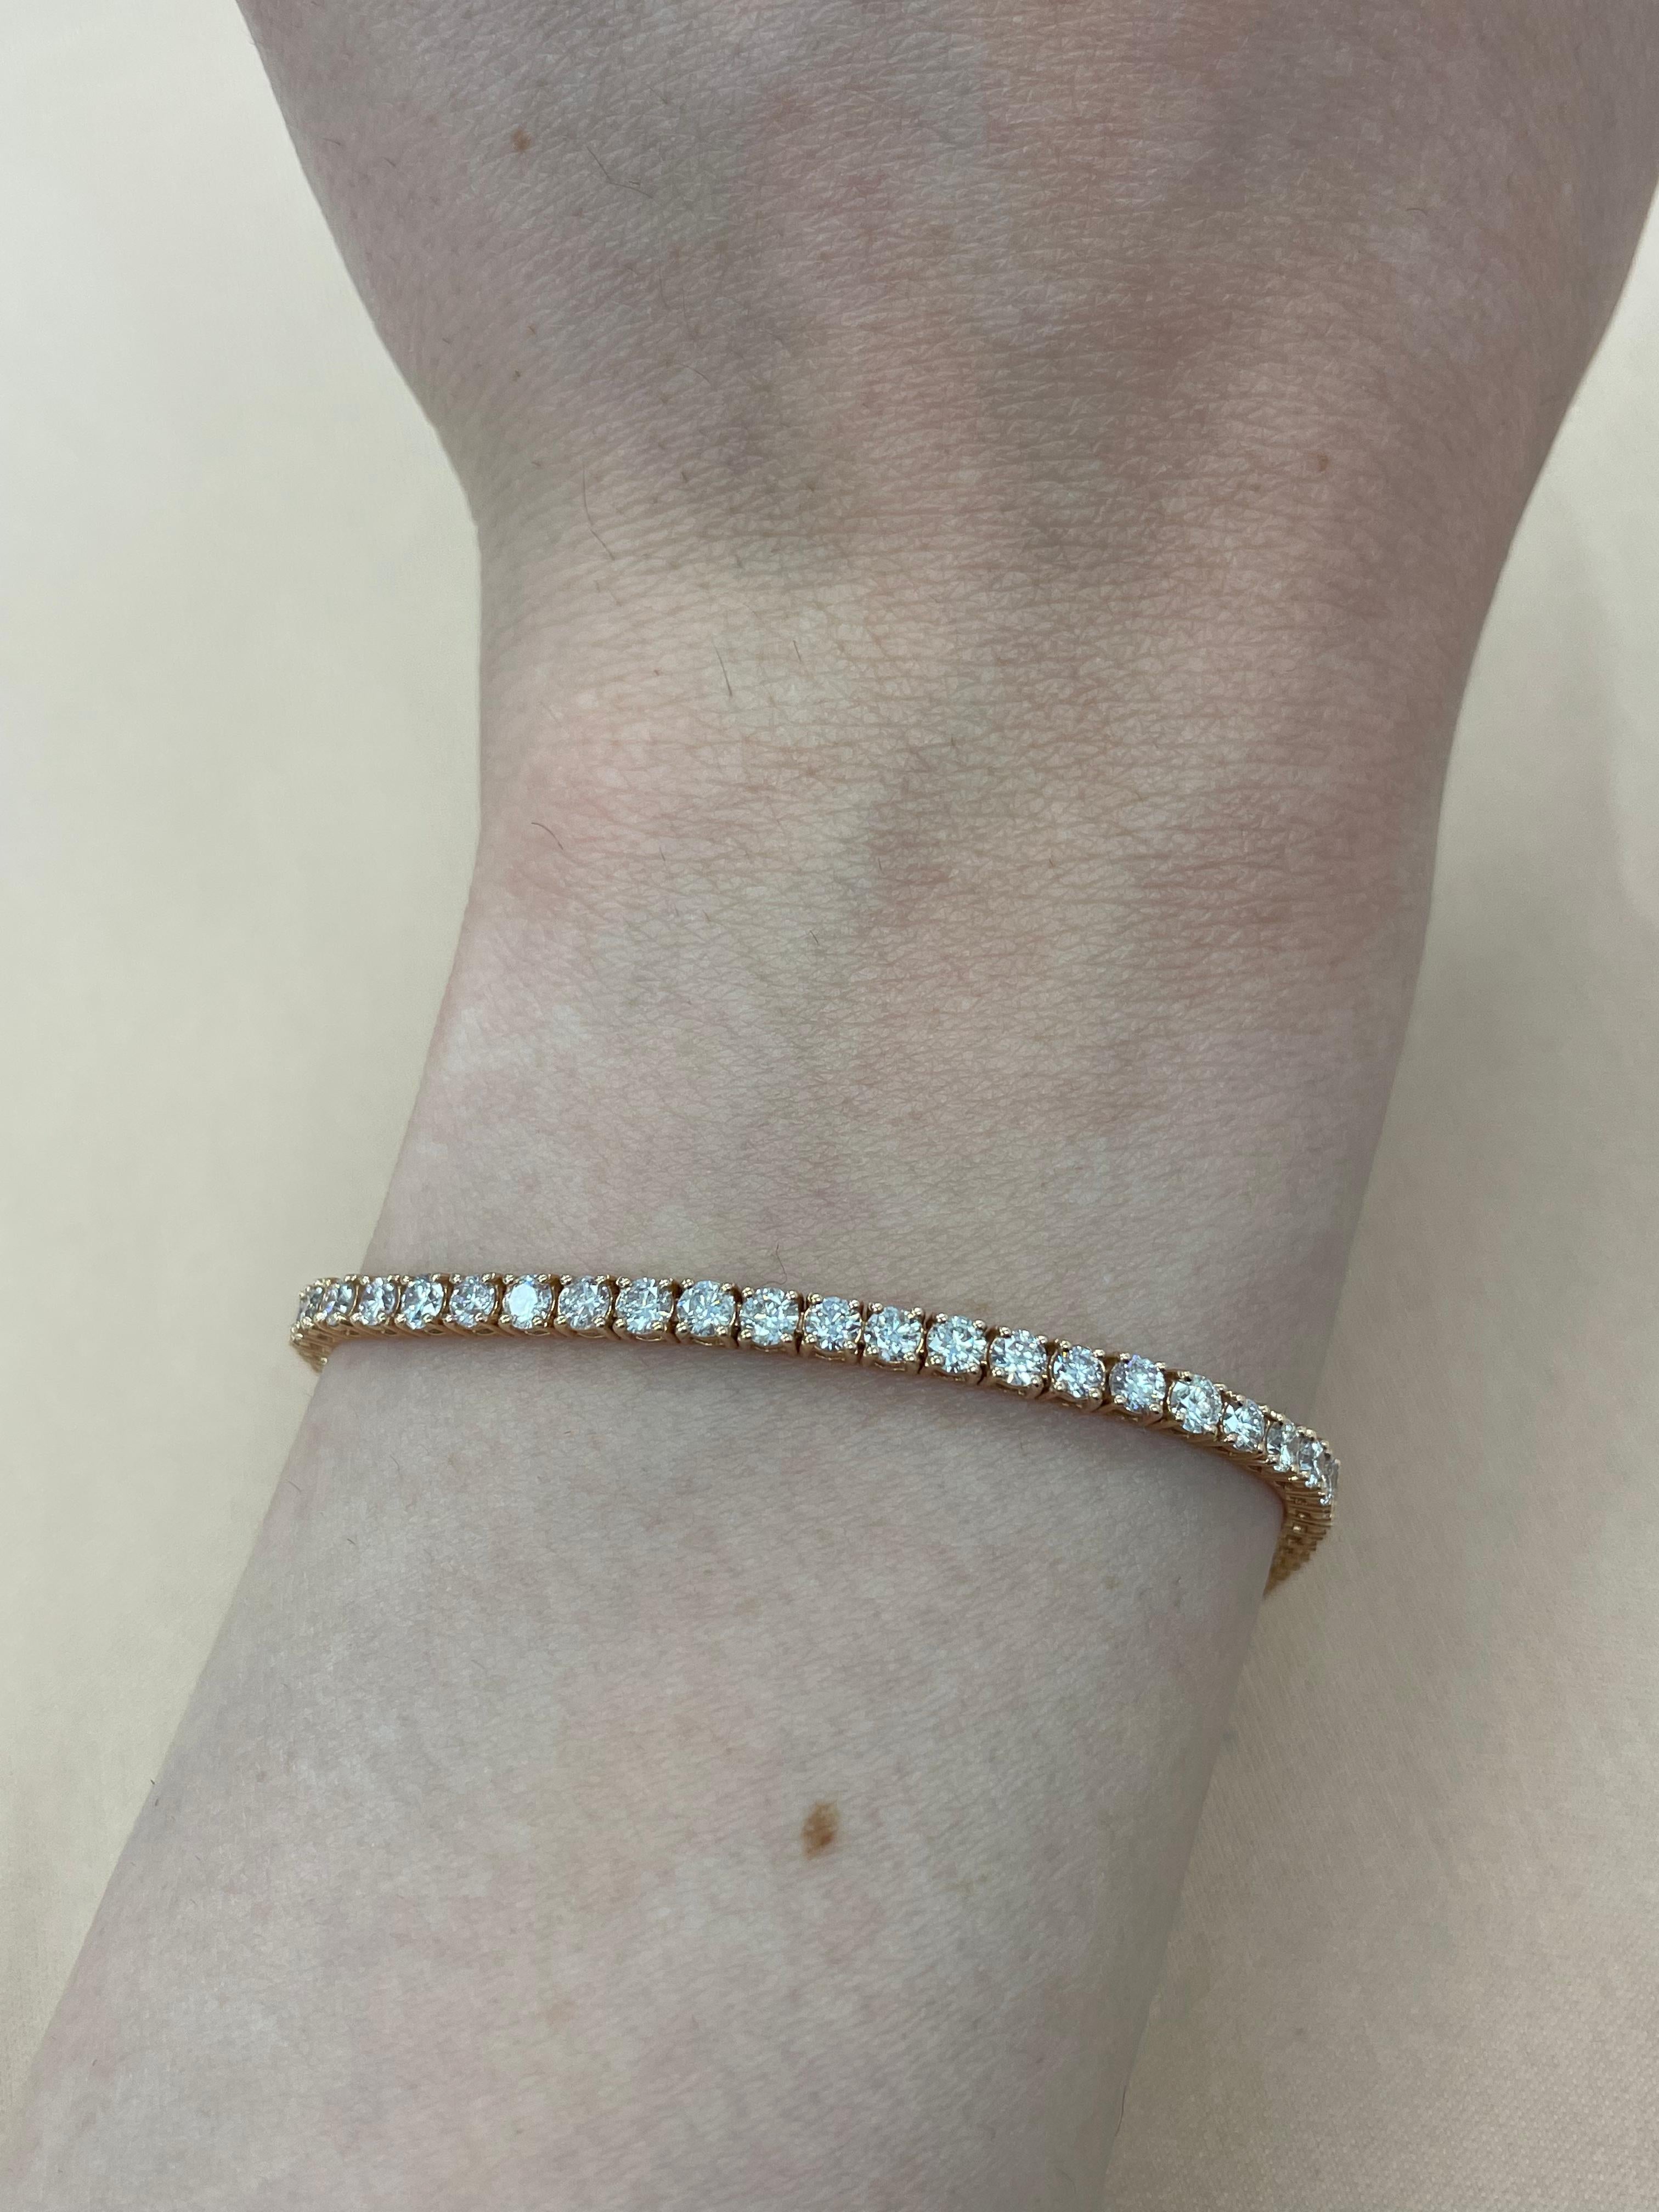 Exquisite and timeless diamonds tennis bracelet, by Alexander Beverly Hills.
63 round brilliant diamonds, 4.05 carats total. Approximately Very Light Pink color (looks like regular white diamonds in mounting) and SI clarity. Four prong set in 14k